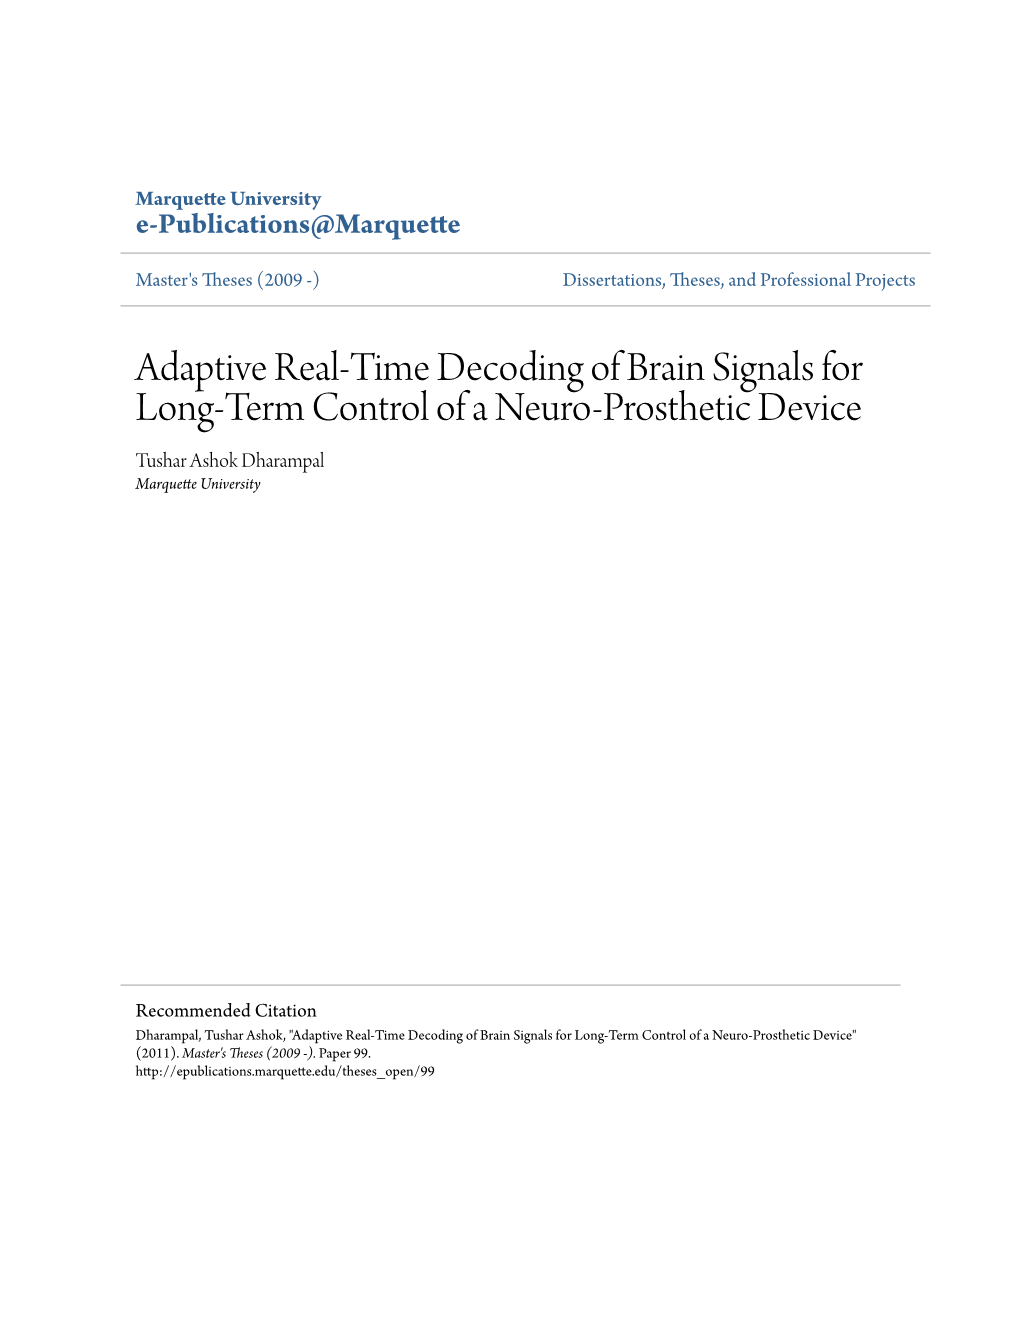 Adaptive Real-Time Decoding of Brain Signals for Long-Term Control of a Neuro-Prosthetic Device Tushar Ashok Dharampal Marquette University